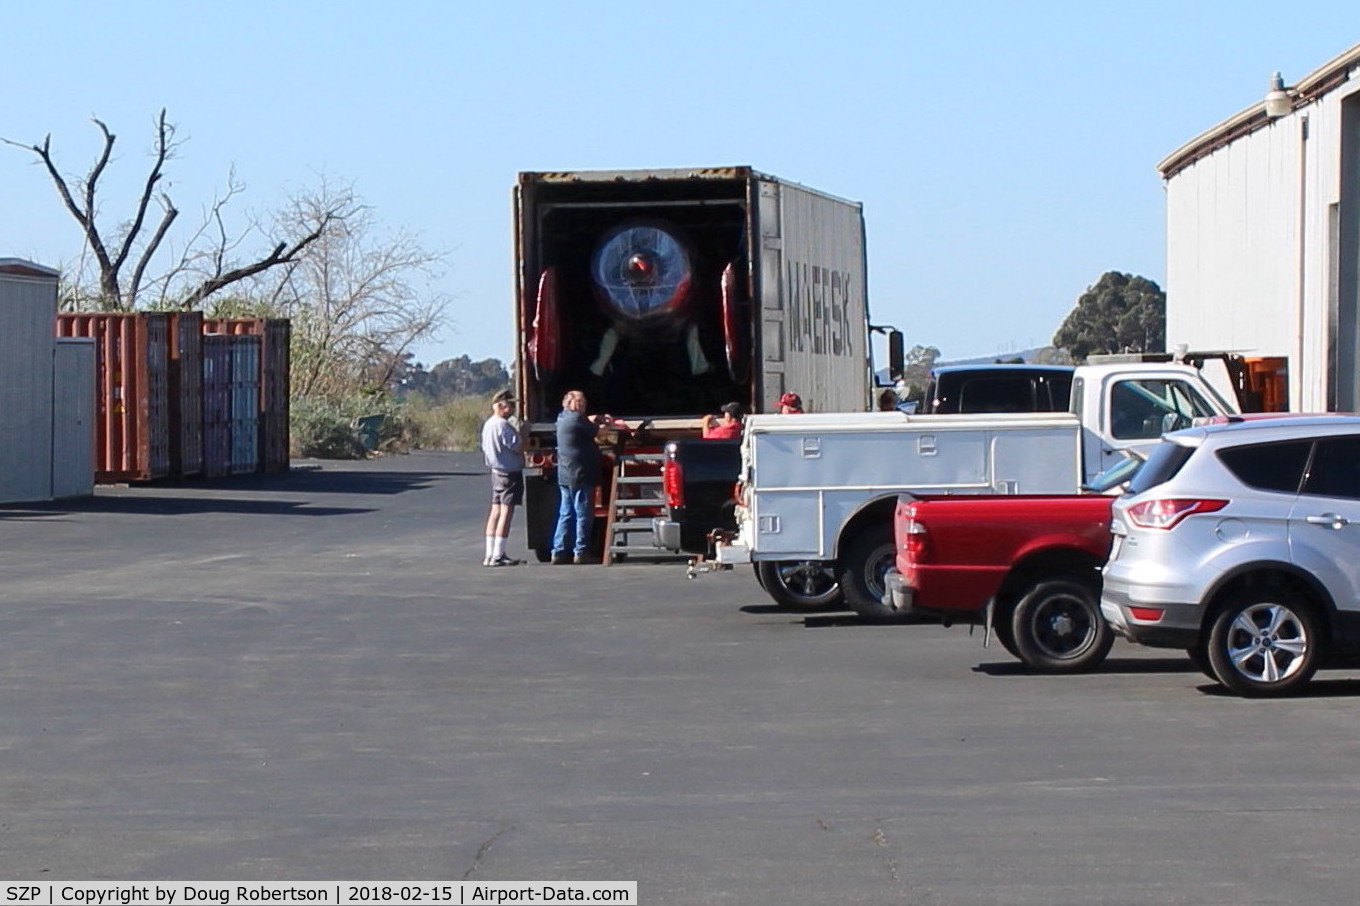 Santa Paula Airport (SZP) - MAERSK LINE arrival truck to unload Kimball PITTS Model 12 biplane aircraft for reassembly. Maersk  is largest international shipper using ocean freighters. Location-behind Ray's Aviation. Some ocean freight containers in left side past Tee Hangar.